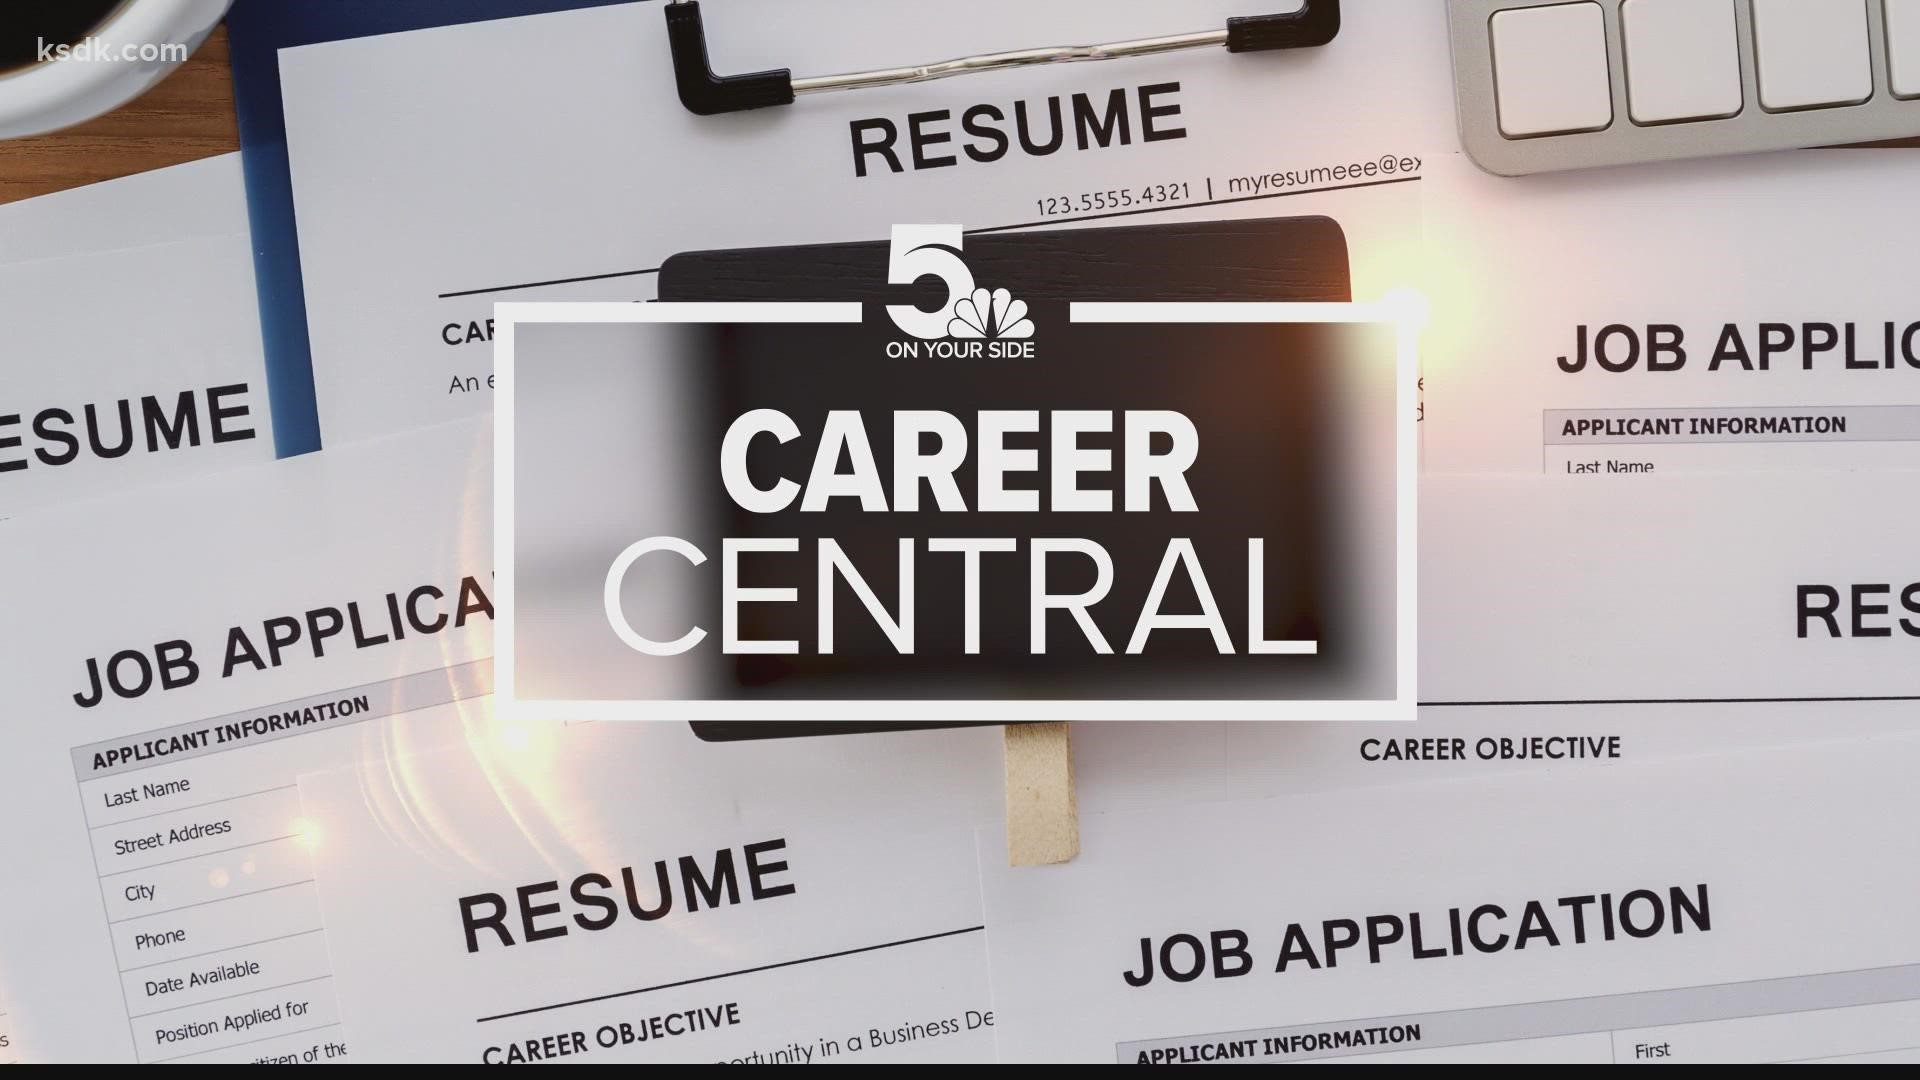 There are many job opportunities for City of St. Louis residents in this week's Career Central.